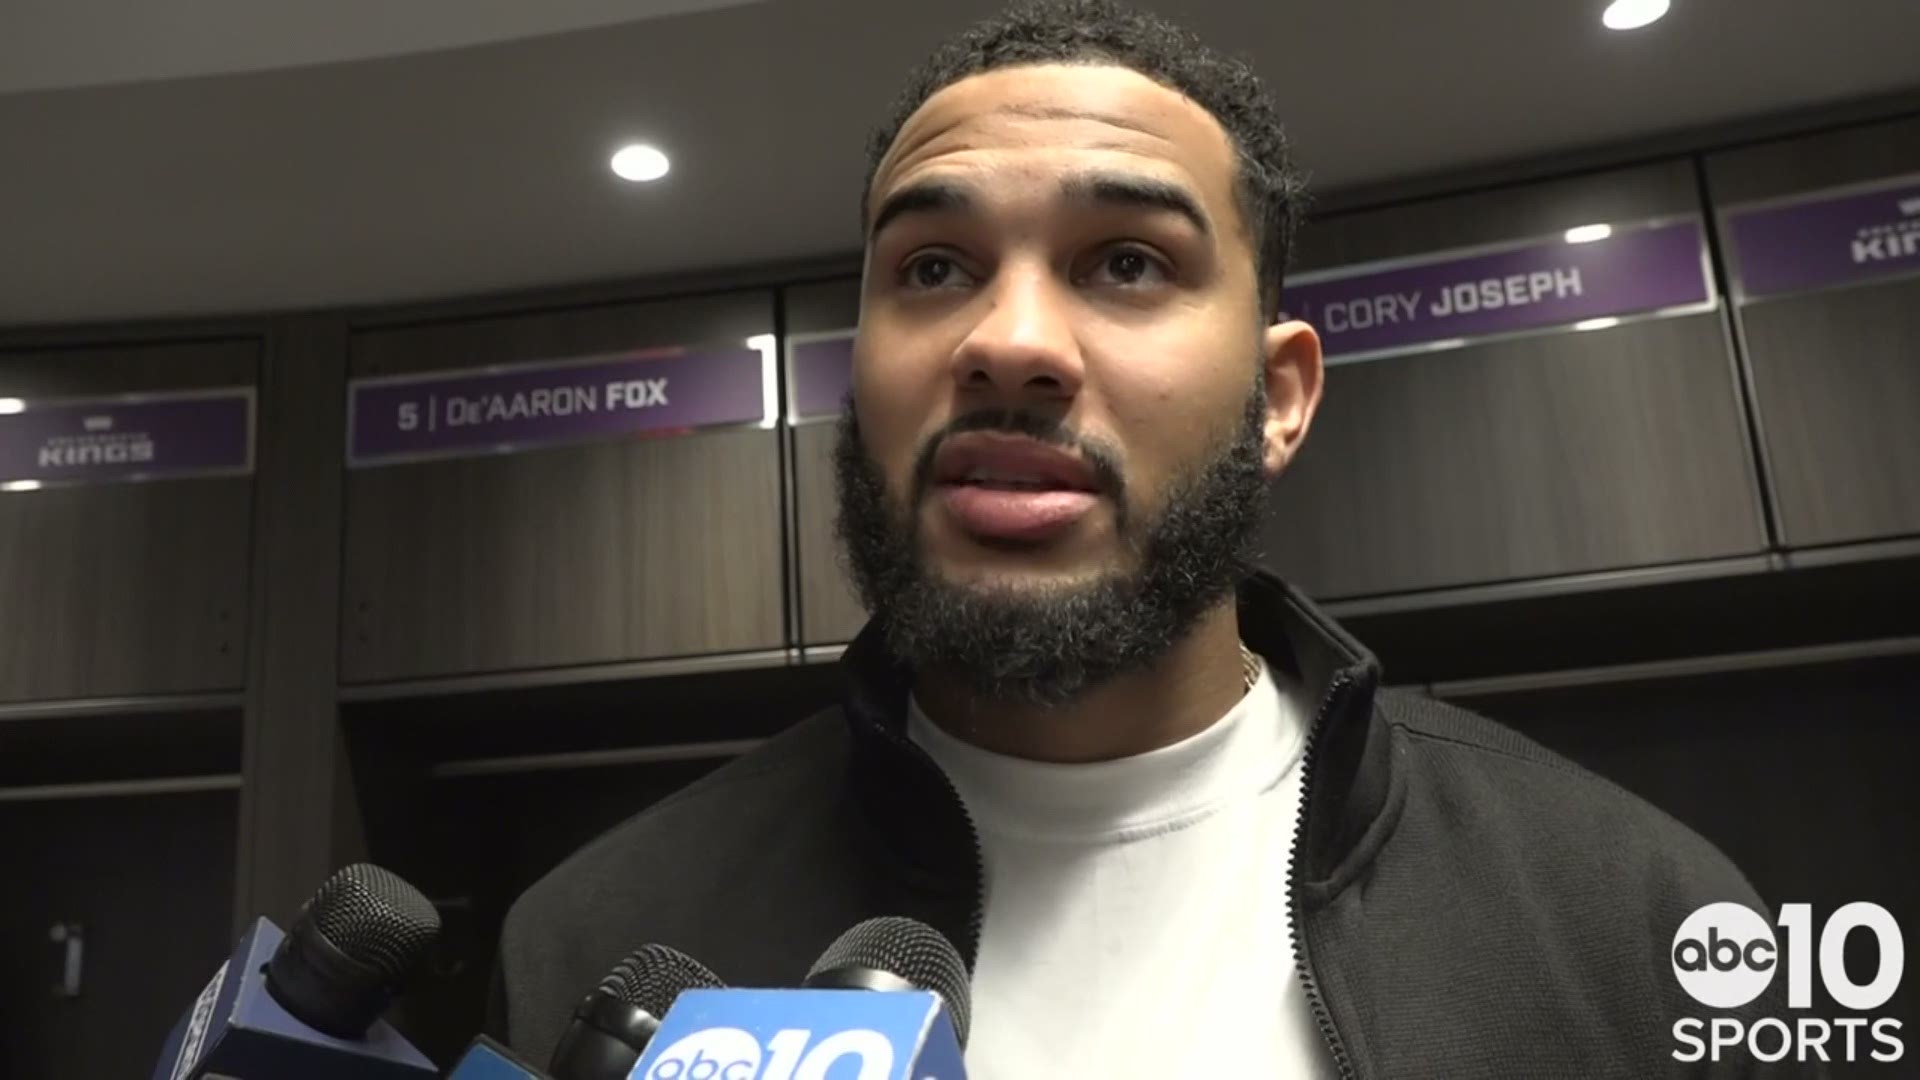 Kings PG Cory Joseph discusses Saturday's loss to the Phoenix Suns, Sacramento dropping its sixth straight contest and facing the Denver Nuggets on Sunday.